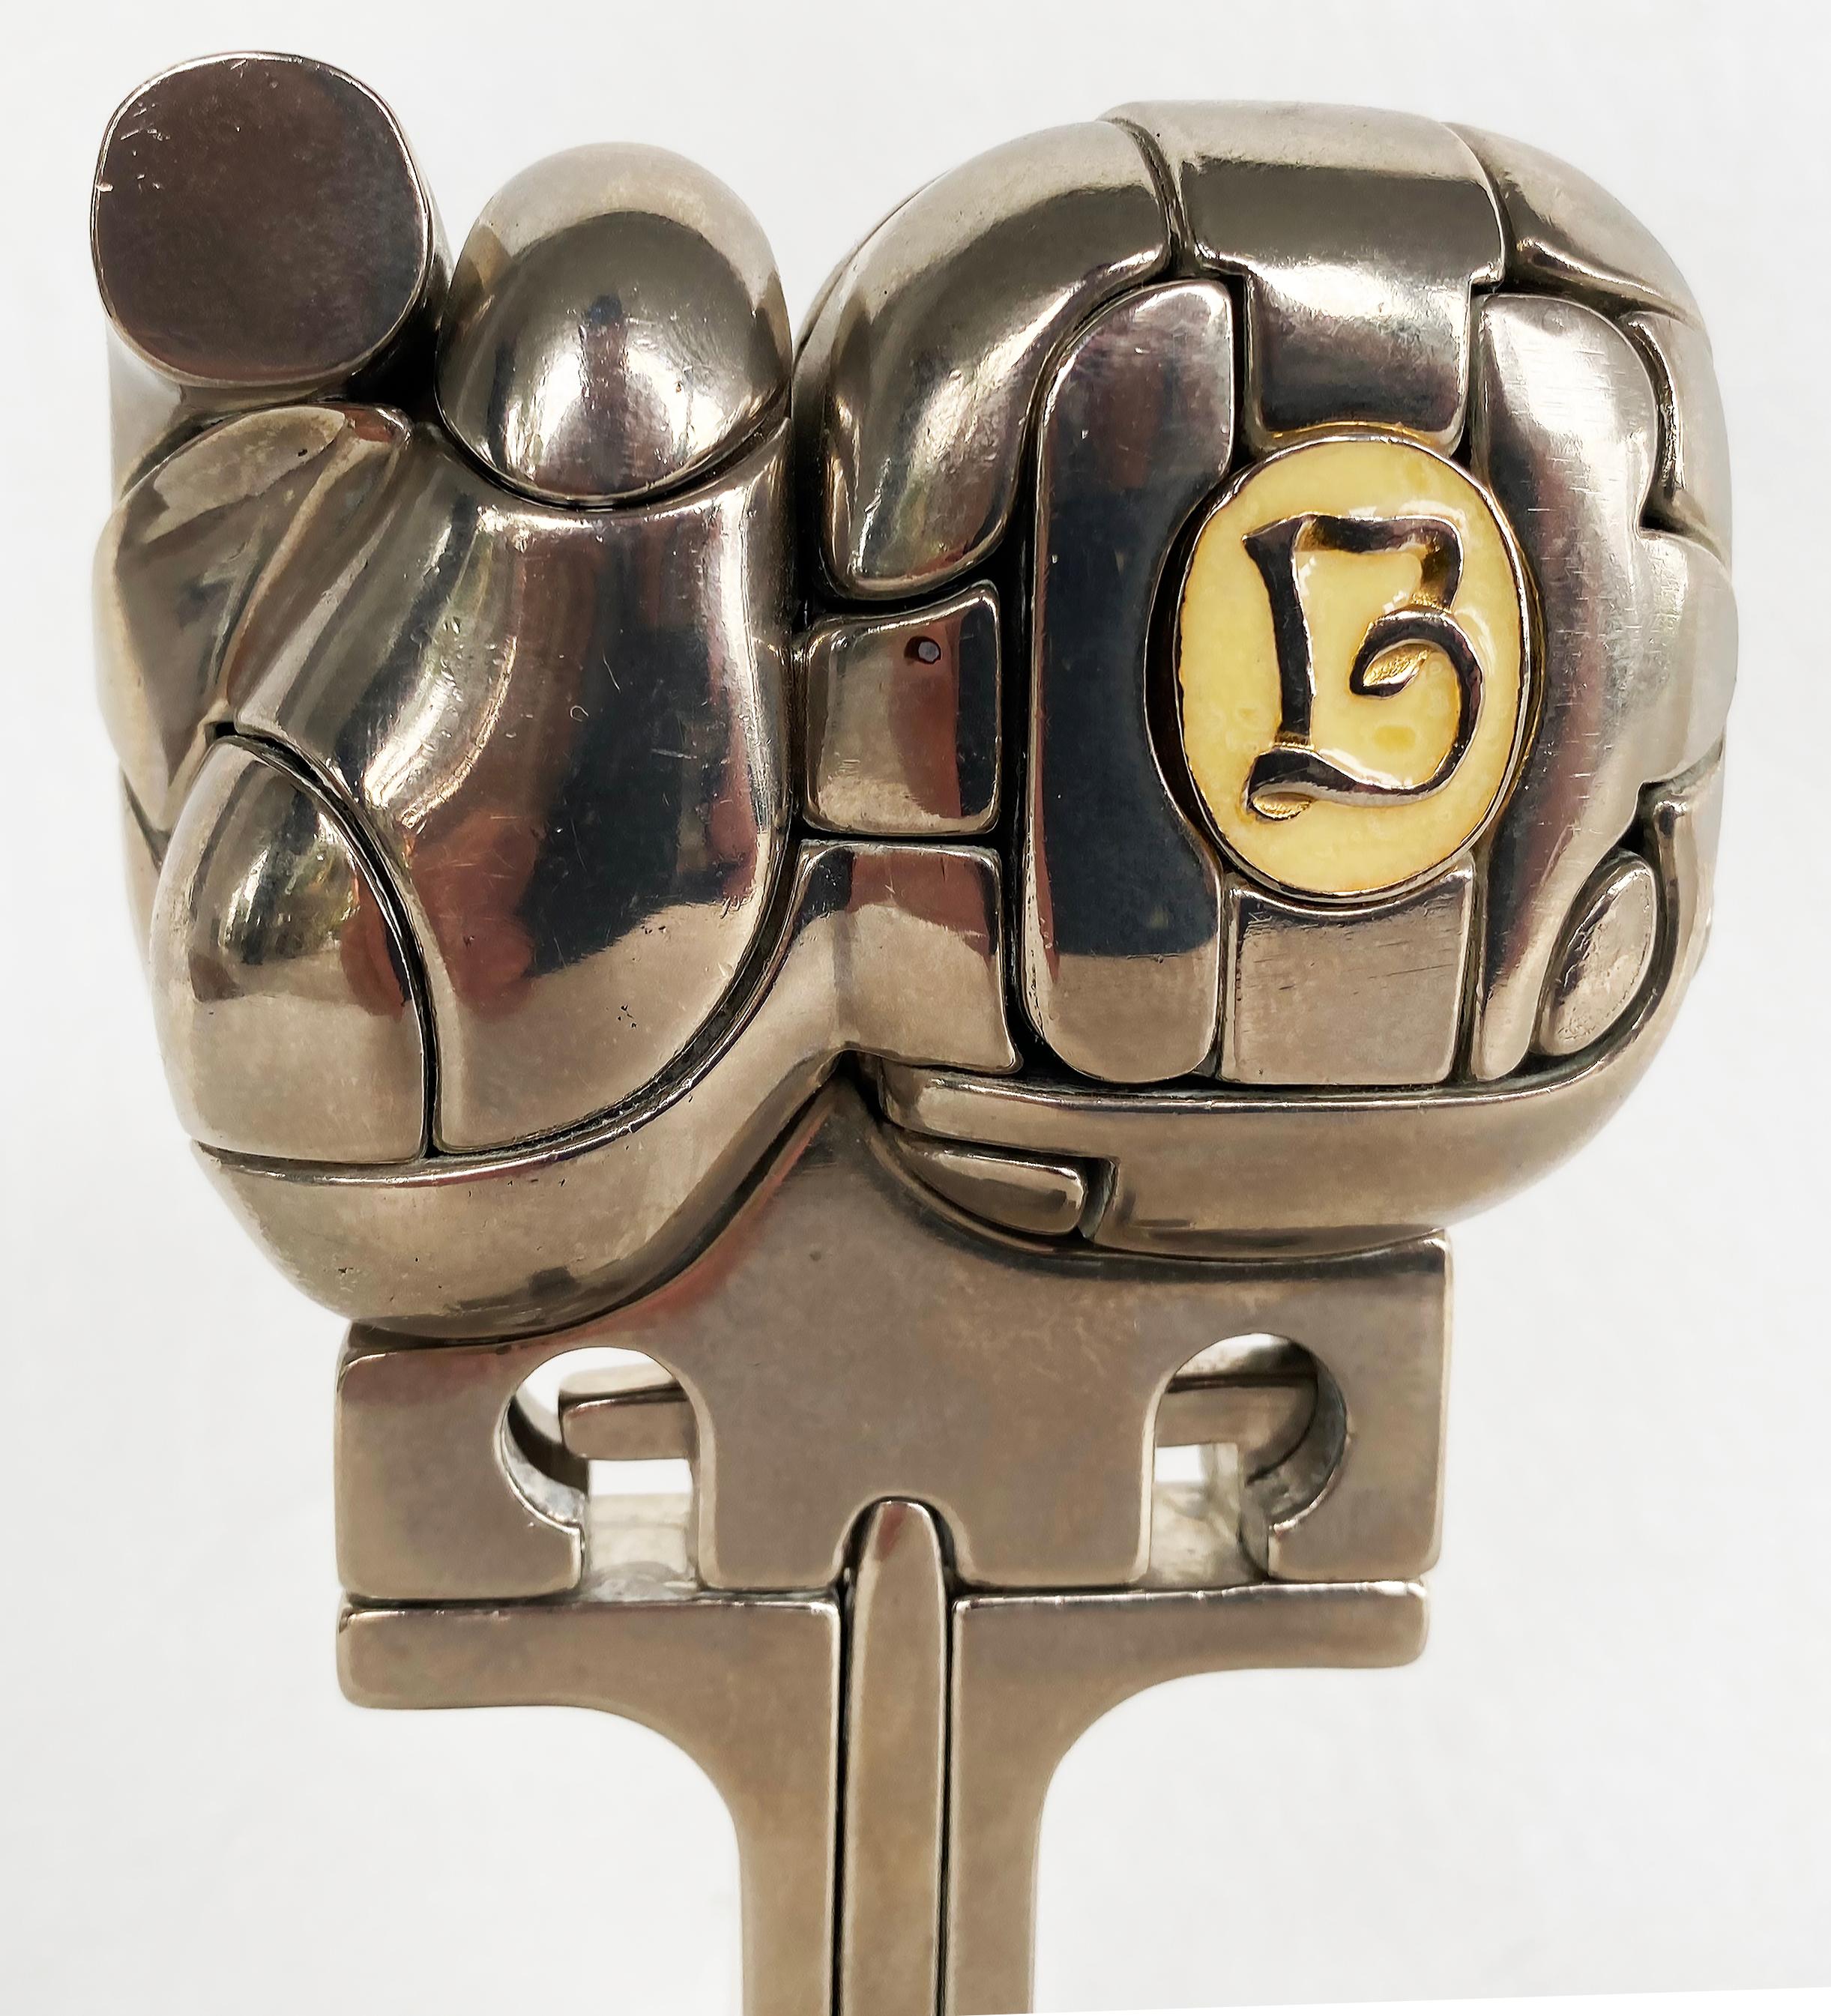 Miguel Ortiz Berrocal Mini Cristina Puzzle Sculpture, Signed #2874/9500

Offered for sale is a Miguel Berrocal (1933-2006) Mini Cristina puzzle sculpture from 1969-1970. This sculpture comes apart in 23 different components and includes wearable